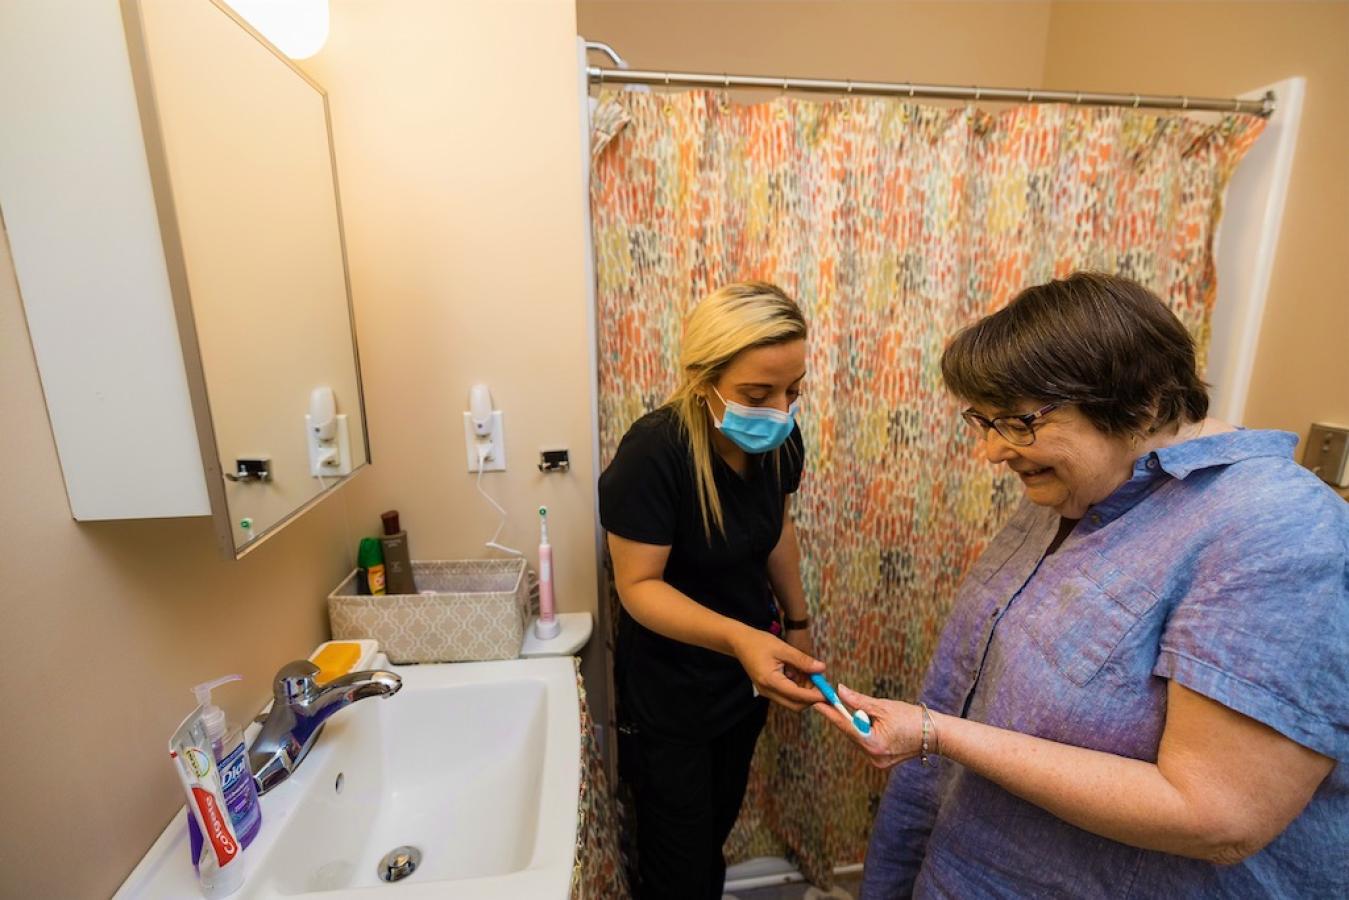 A nurse helping a resident get toothpaste in their bathroom.